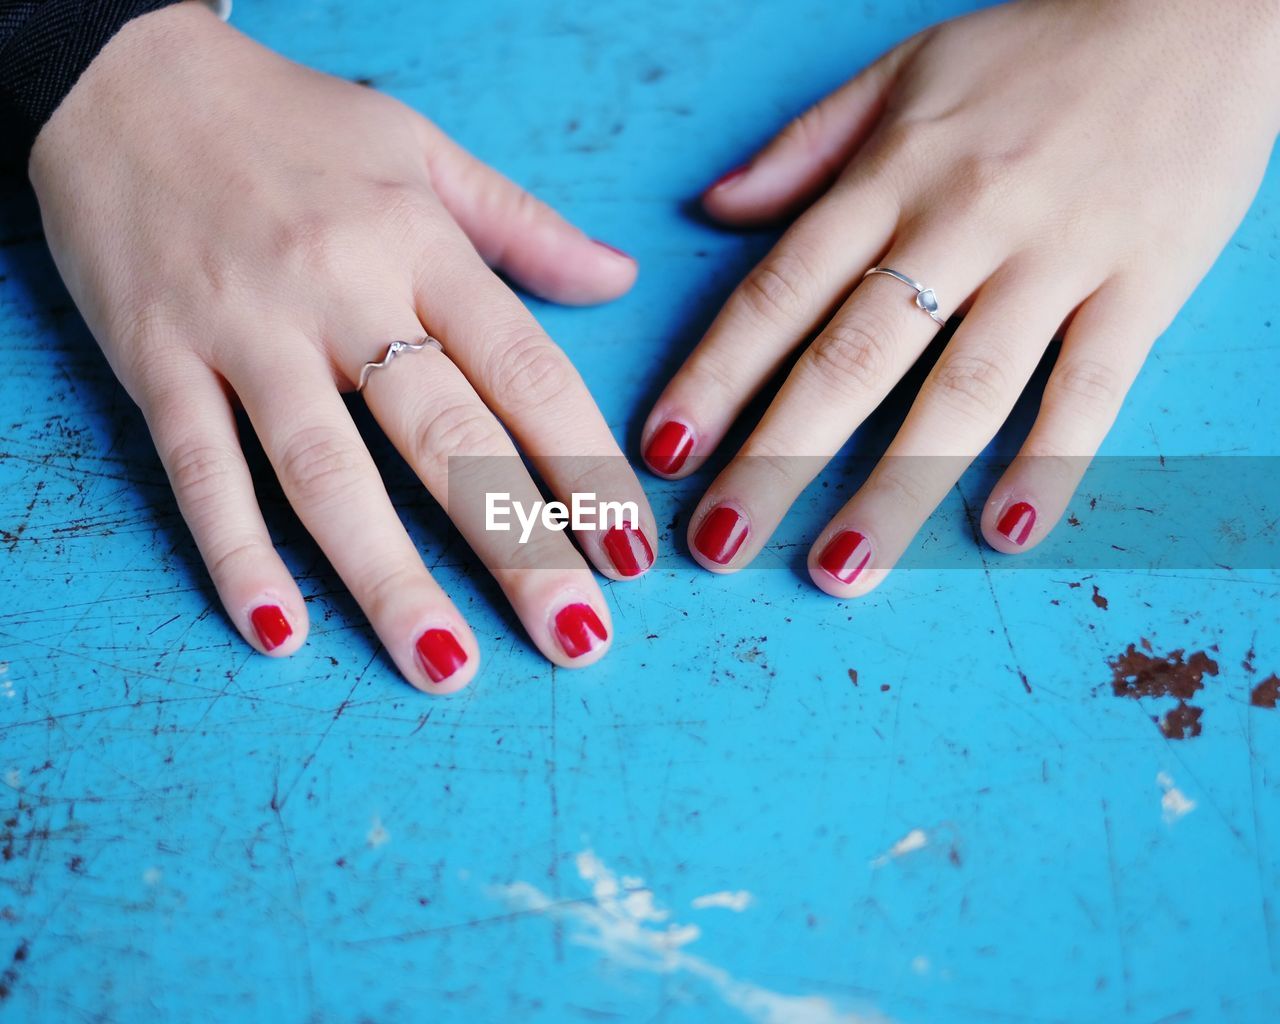 Cropped image of hands with red nail polish